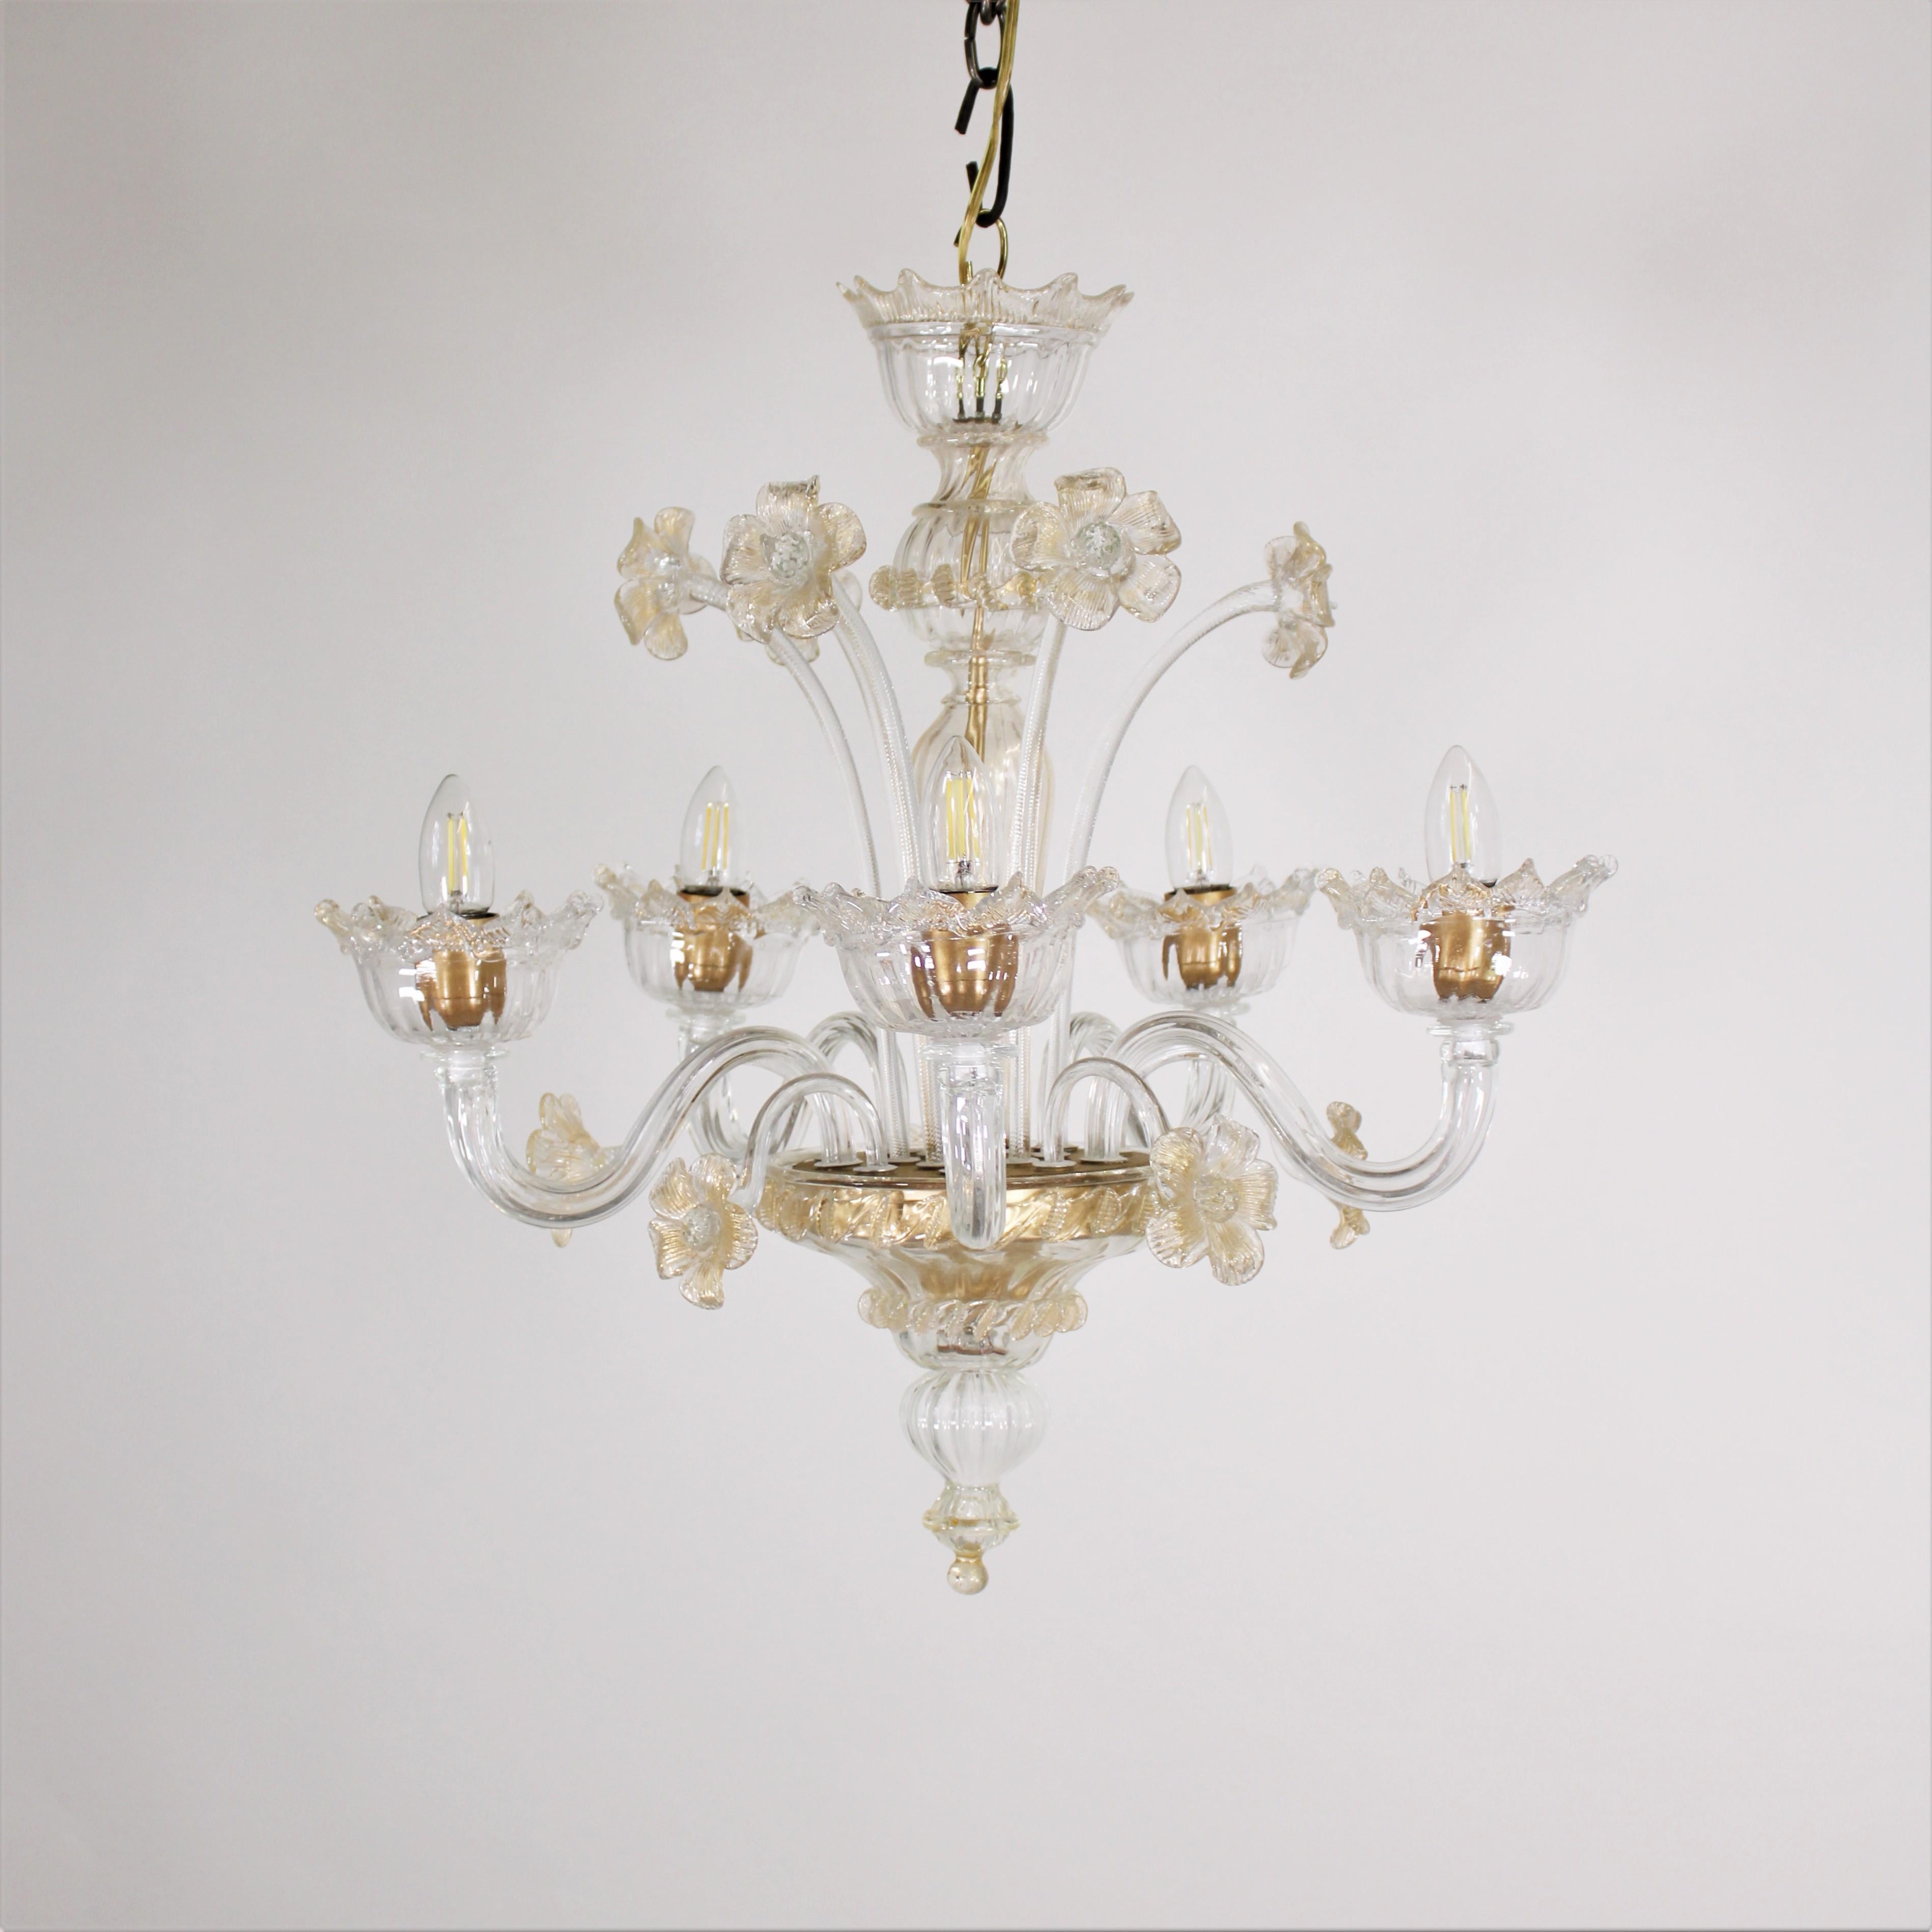 This handcrafted gold-infused cristallo Murano chandelier has five arms holding bobeches with petal-shaped trim and a bulbous center column with rigaree trim. The golden details are concentrated on the flowers and trim details, bringing attention to